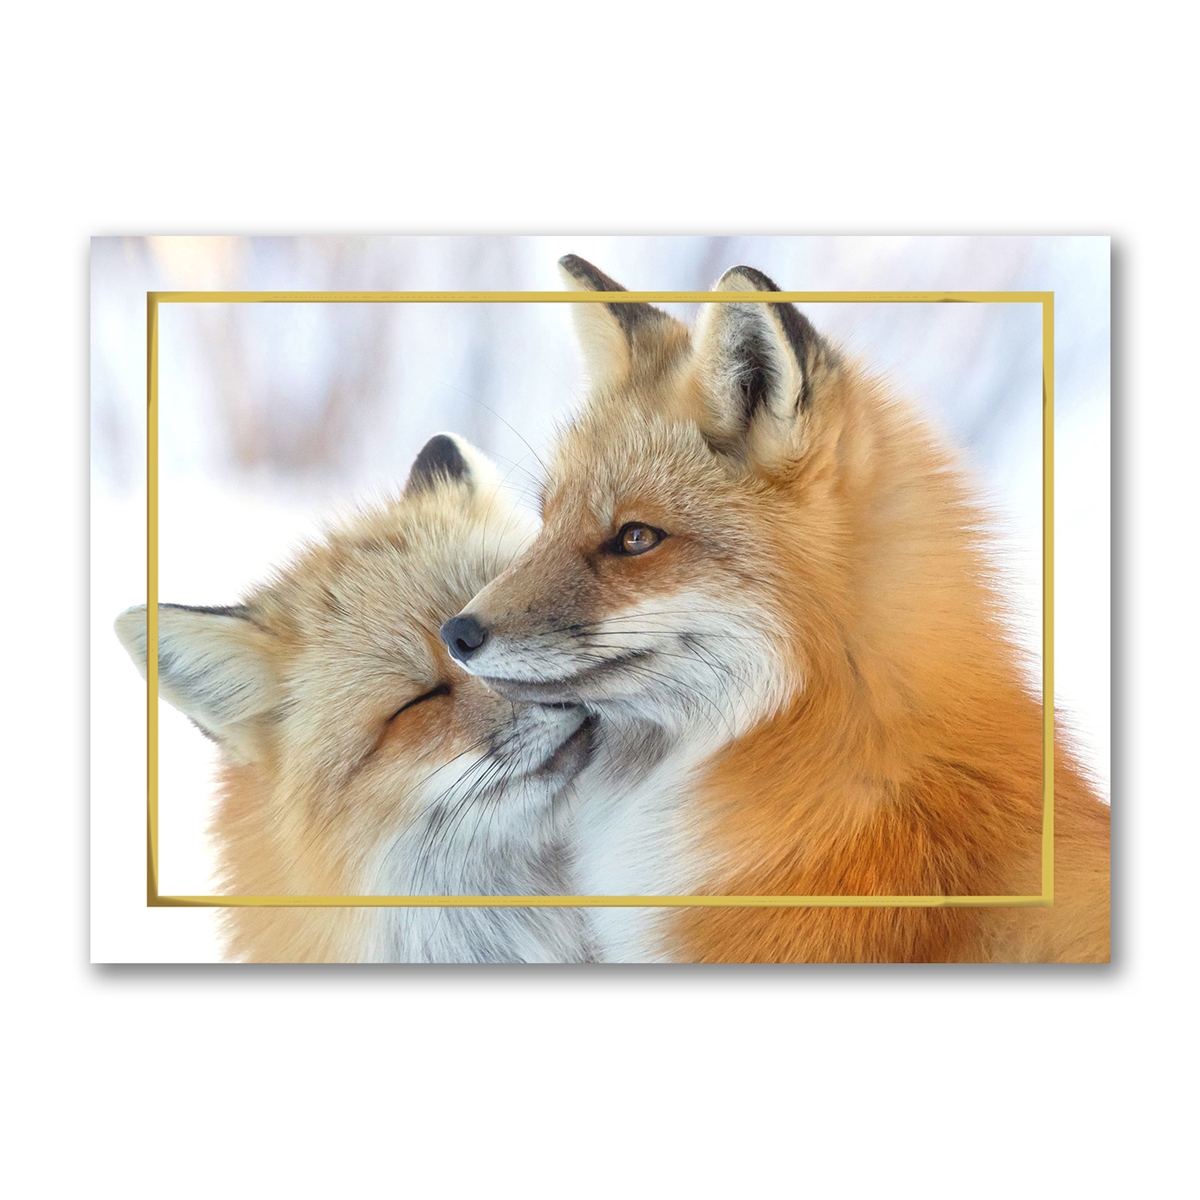 Cuddling Foxes Holiday Cards